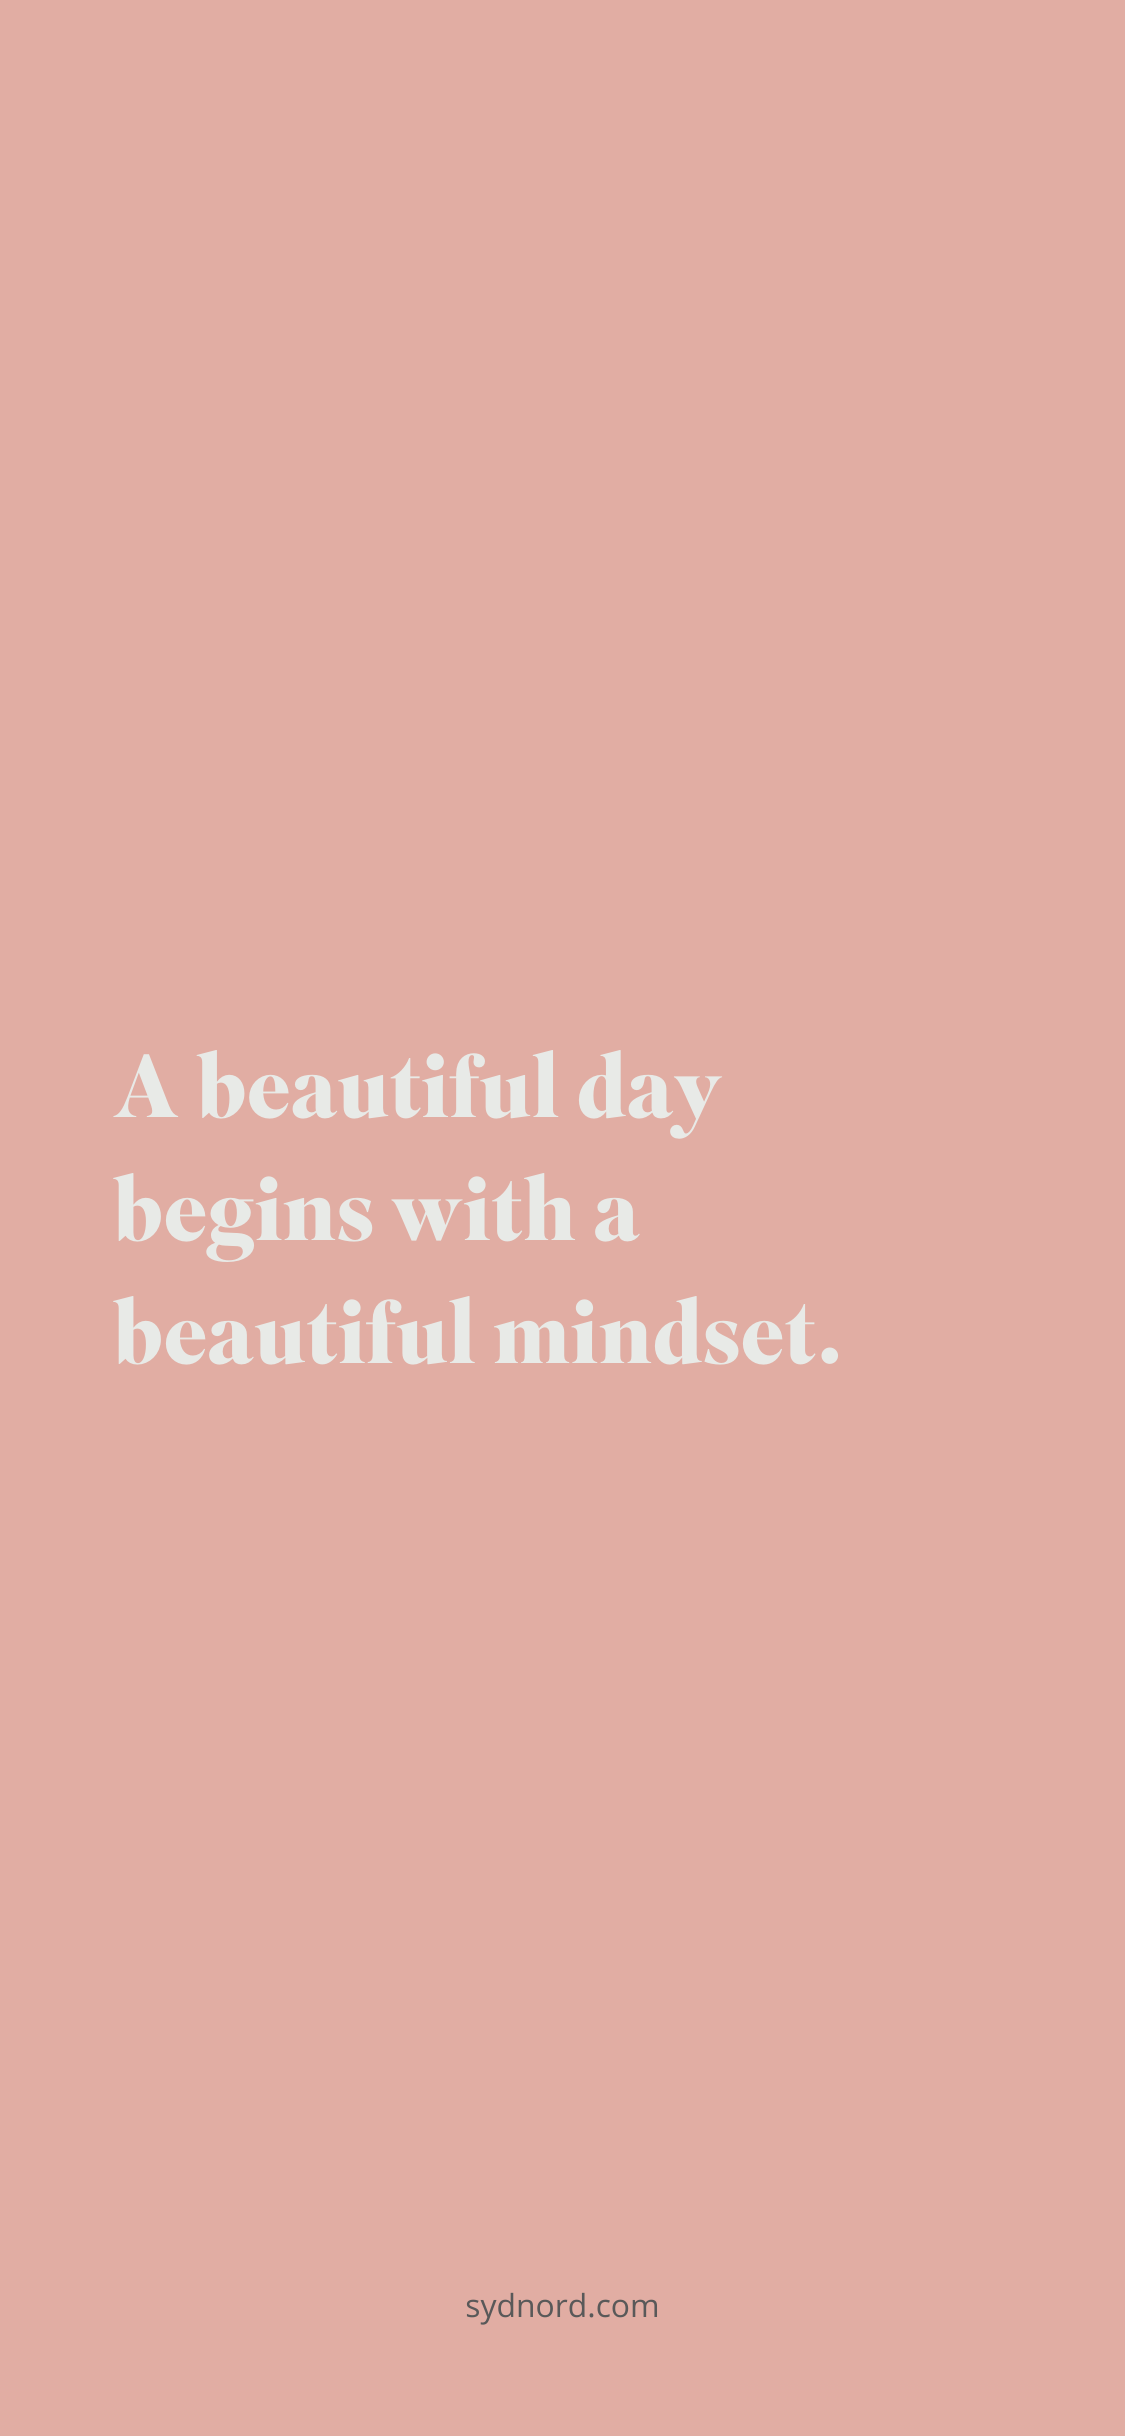 Positive quote: A beautiful day begins with a beautiful mindset.